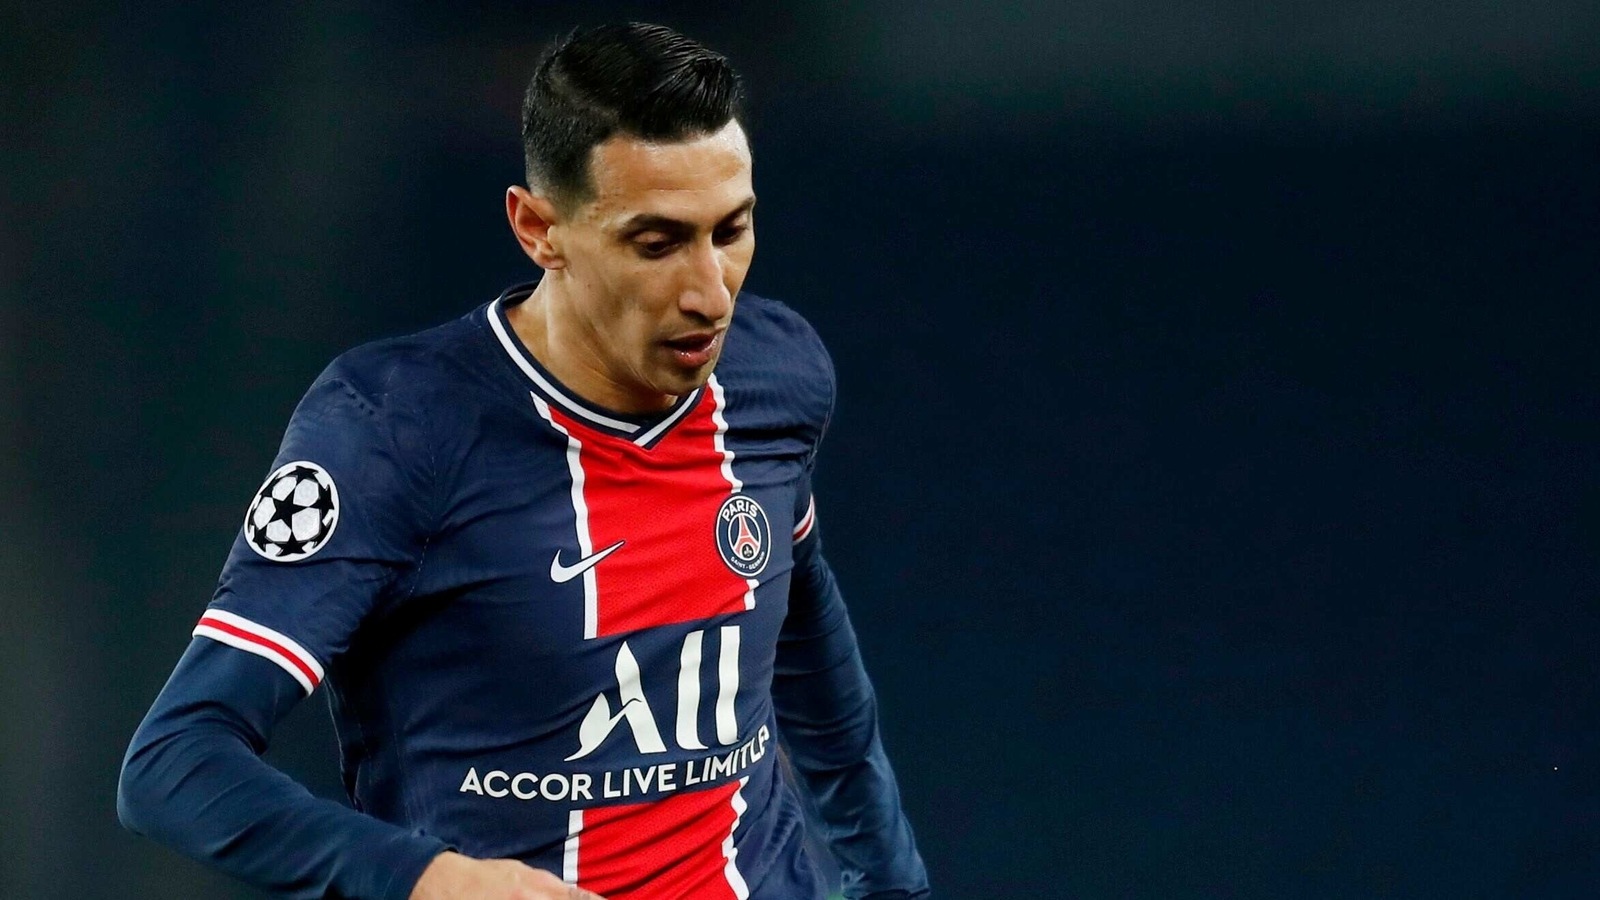 Di Maria leaves PSG game after reports of home break-in | Football News -  Hindustan Times